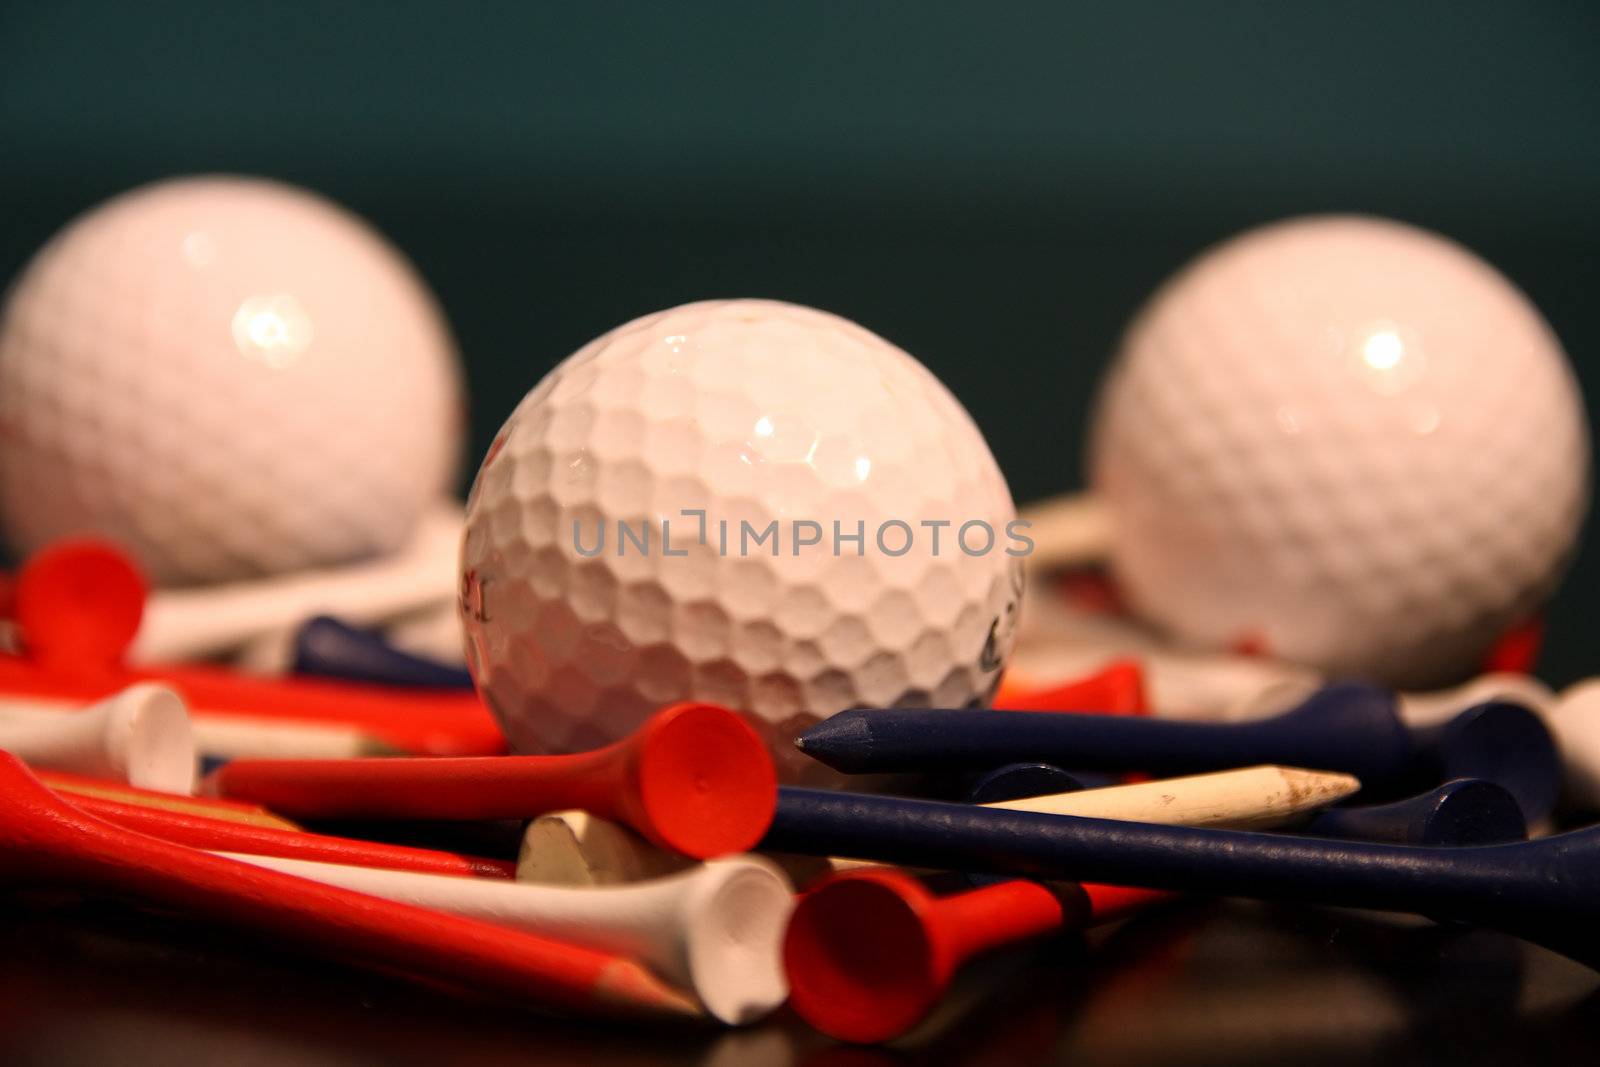 Golf balls and tees by jal300